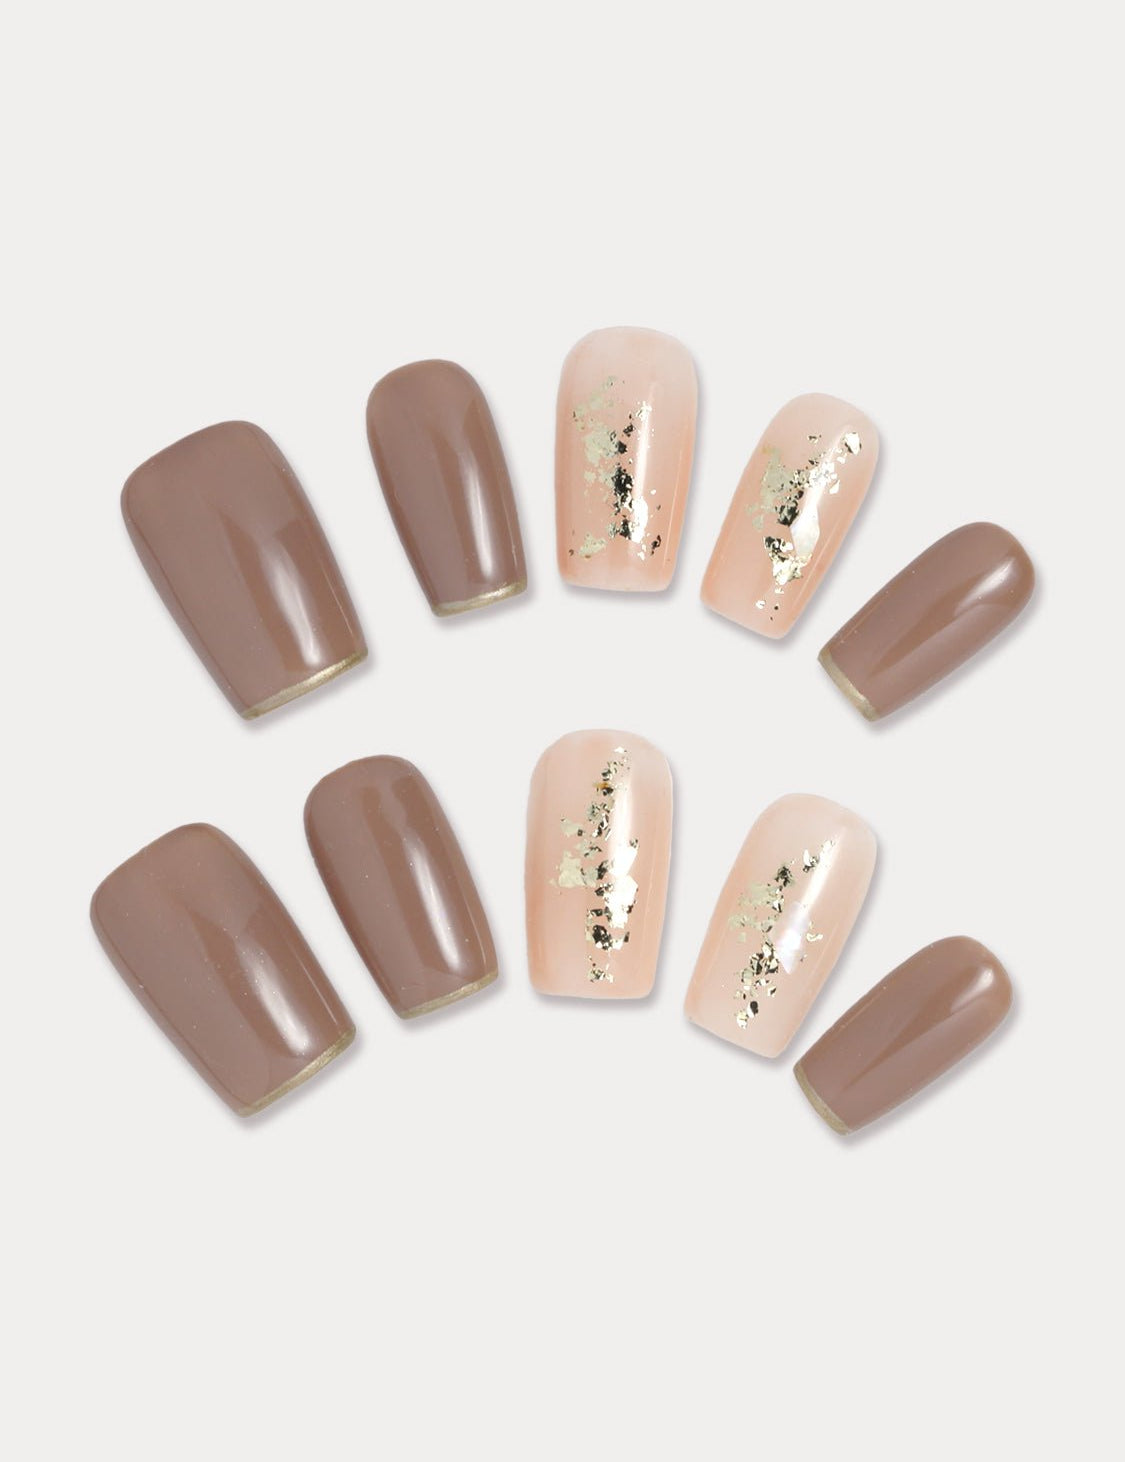 MIEAP Brown Gold Foil press on nail set provides a simple, office-ready look, featuring a square shape design with brown and gold lines for subtle styling. It includes 4 stunning acrylic nails adorned with gold foil and delicate shell details, adding a touch of elegance to your fingertips. #MIEAP #MIEAPnails #pressonnail #falsenail #acrylicnail #nails #nailart #naildesign #nailinspo #handmadenail #autumnnail #nail2023 #graduationnail #classicnail #squarenail #shortnail #brownnail